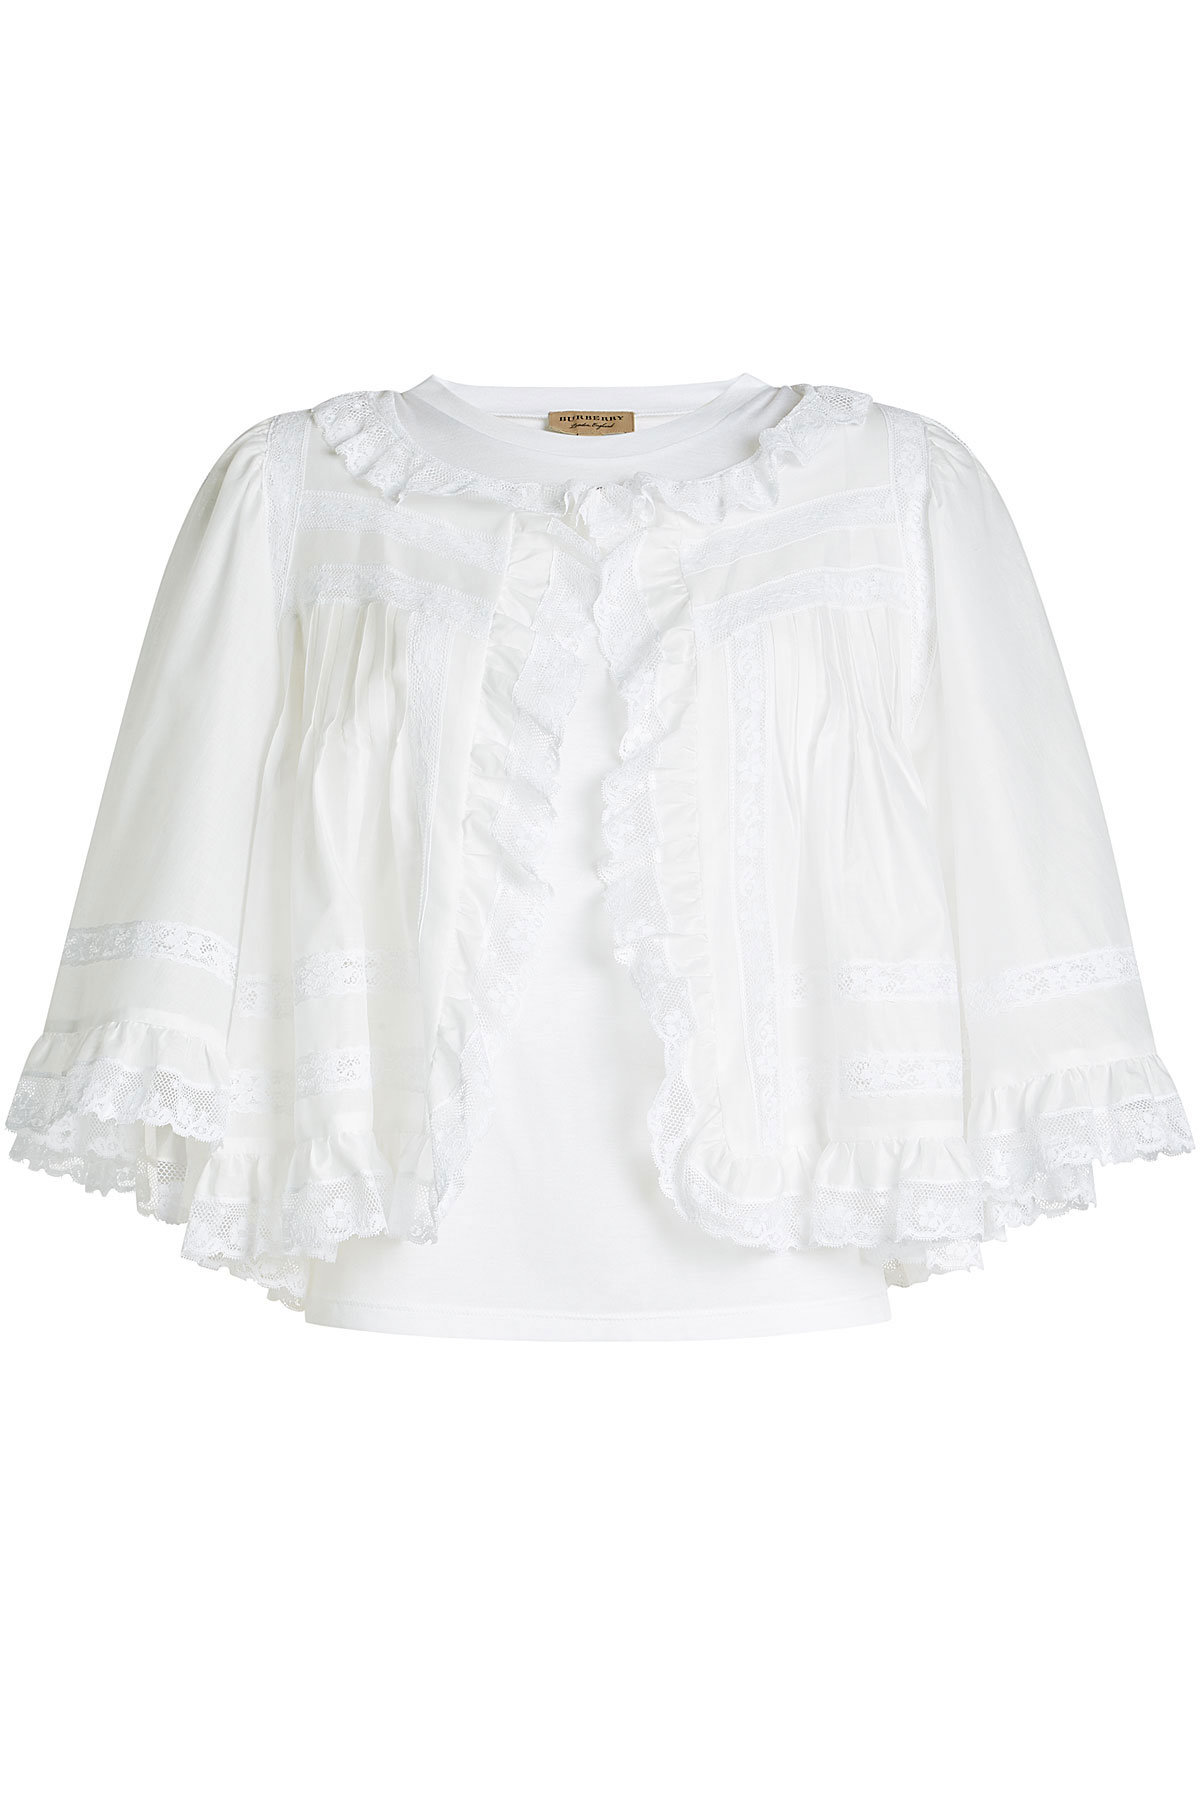 Burberry - Cotton Top with Lace Ruffles